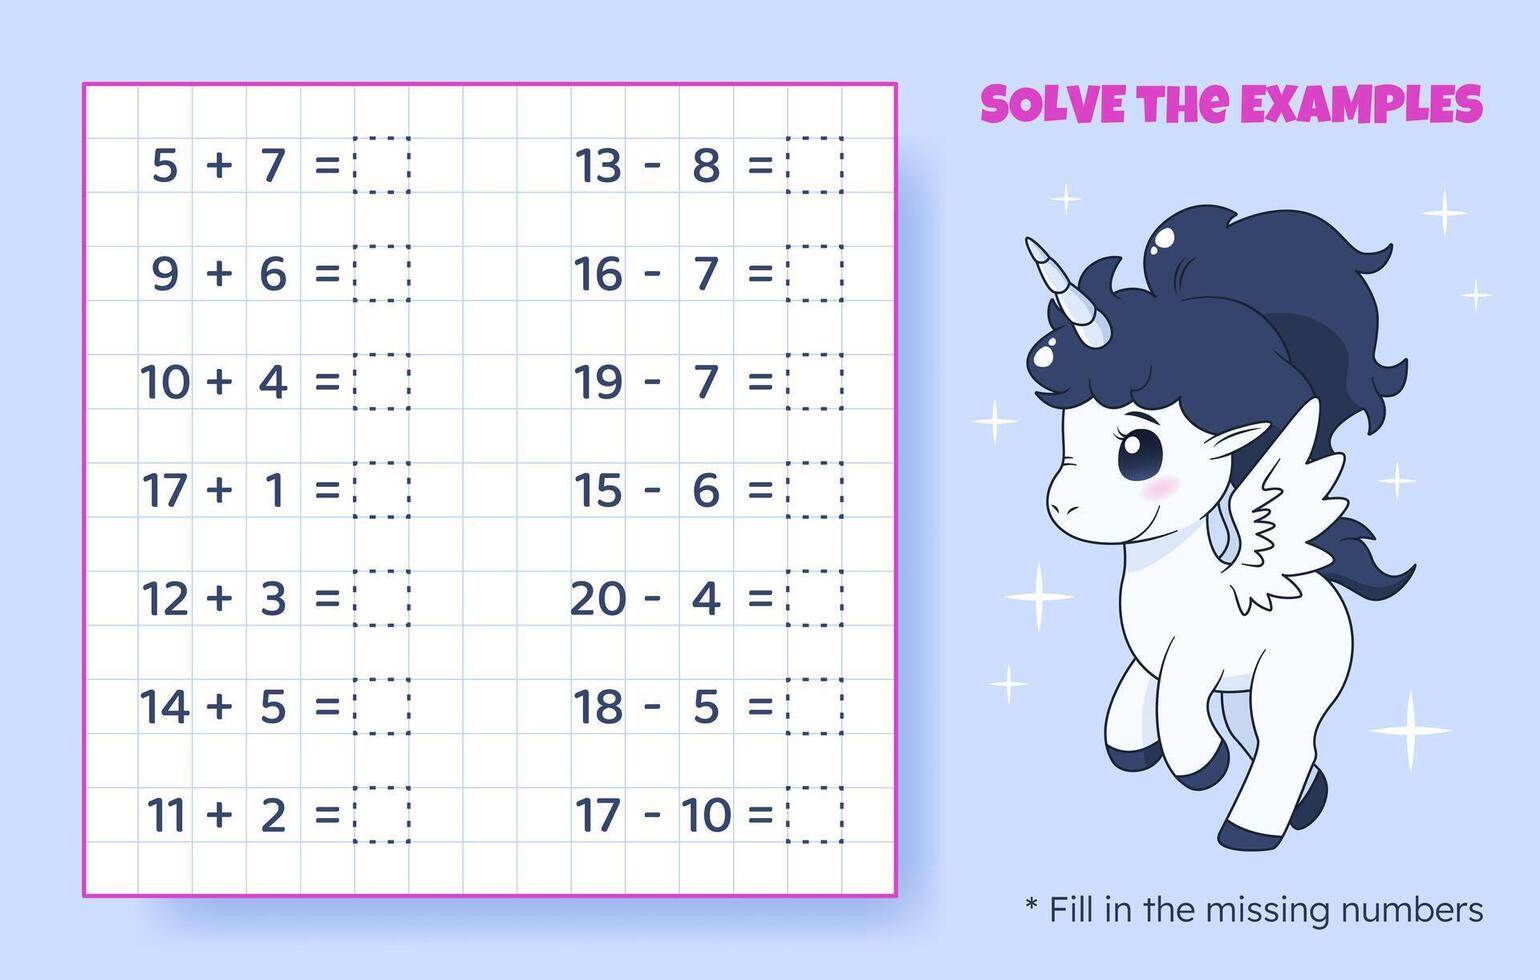 Solve the examples. Addition and subtraction up to 20. Mathematical puzzle game. Worksheet for school, preschool kids. Vector illustration. Cartoon educational game with cute unicorn for children.